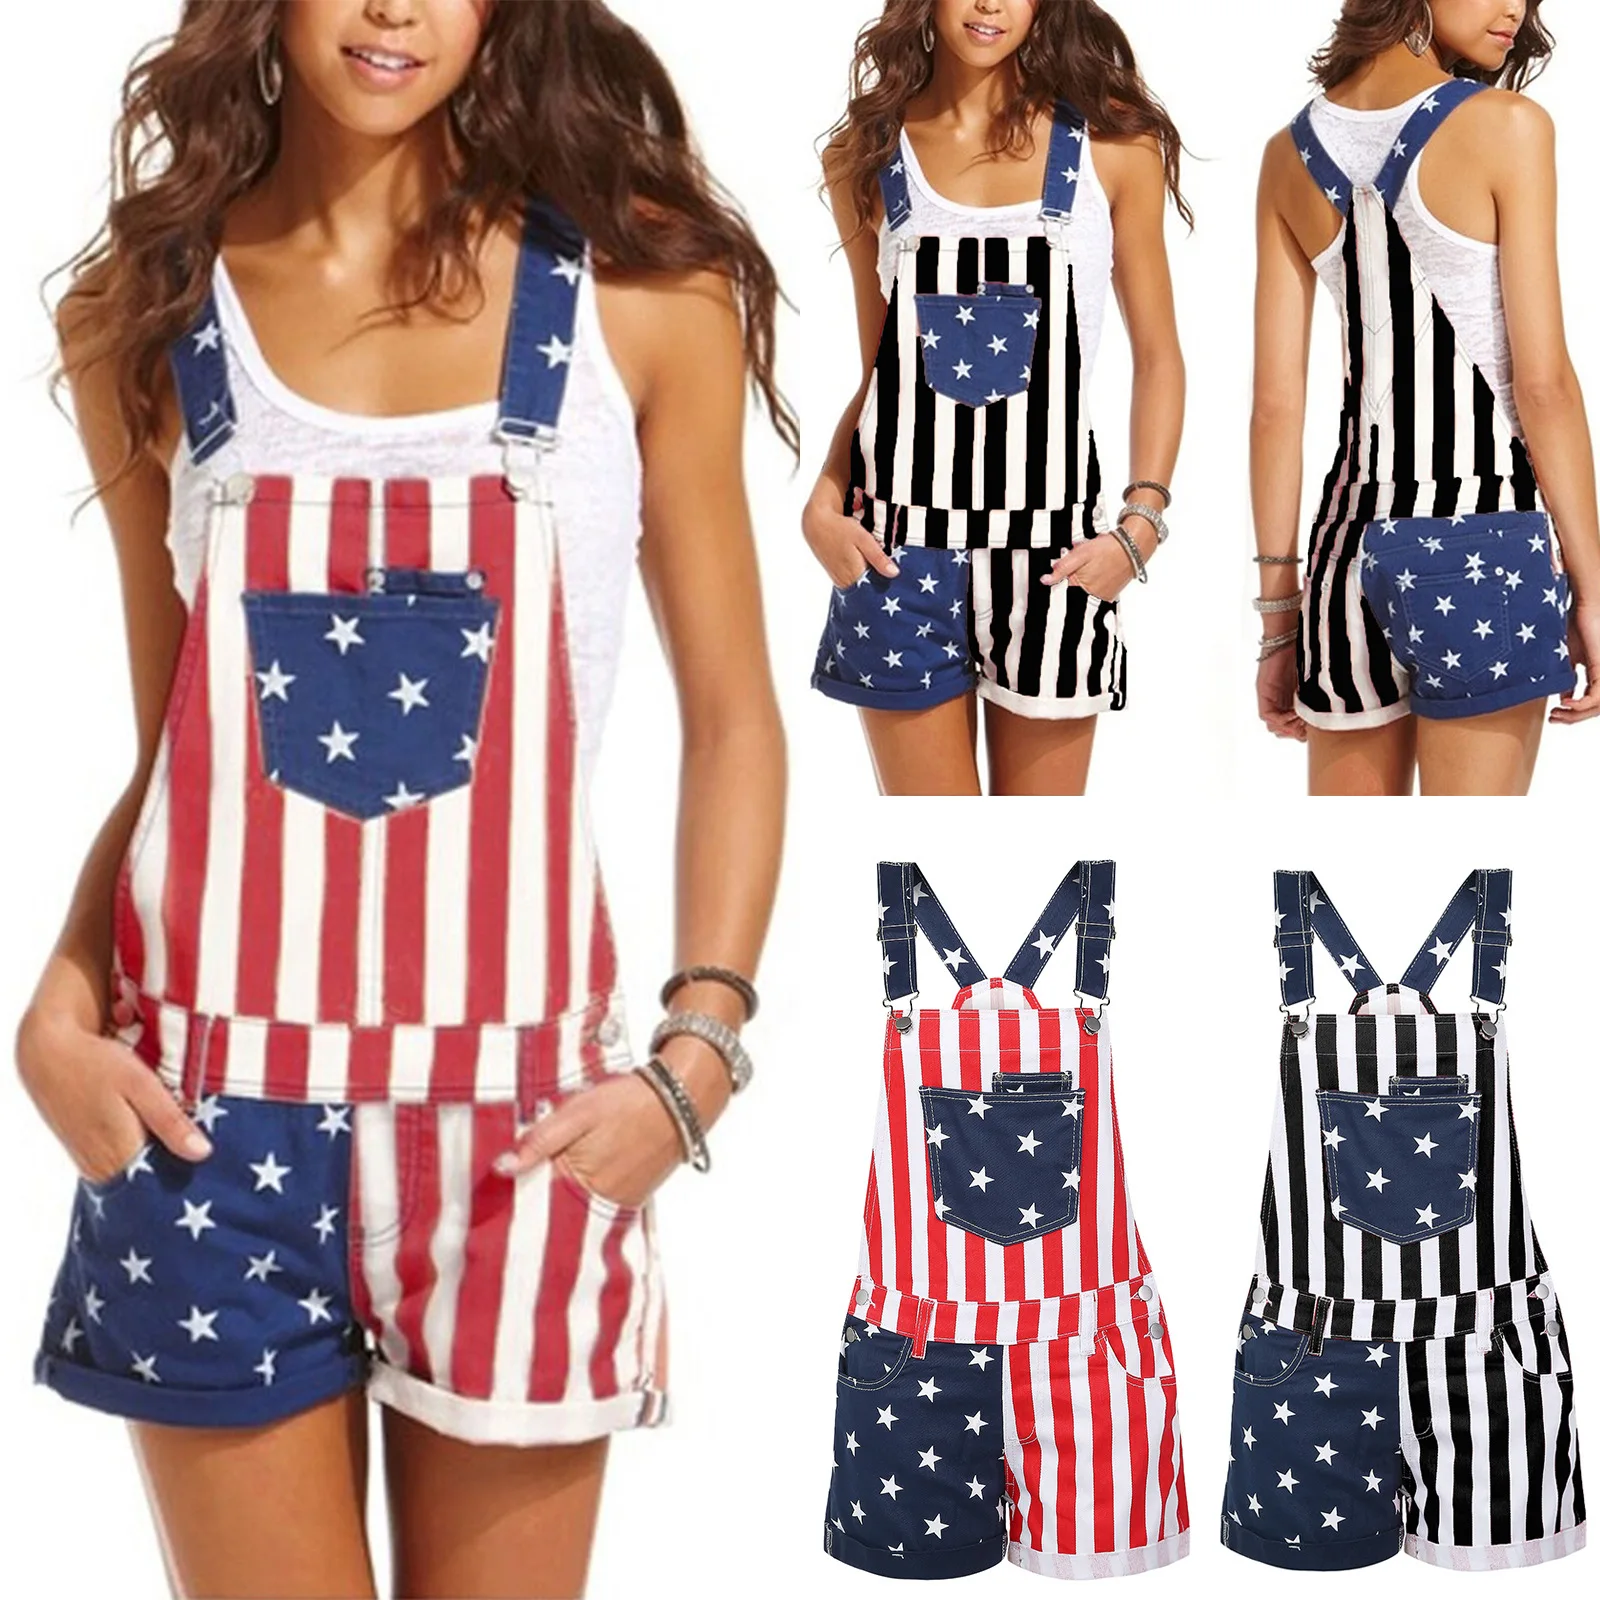 knitted maternity shorts bib pant suspender trouser casual cotton long sleeve romper overalls jumpsuit soft streetwear plus size American Flag Maternity Bib Pant Suspender Trouser Strap Shorts Casual Lady Women Romper Overalls Jumpsuit Streetwear Plus Size